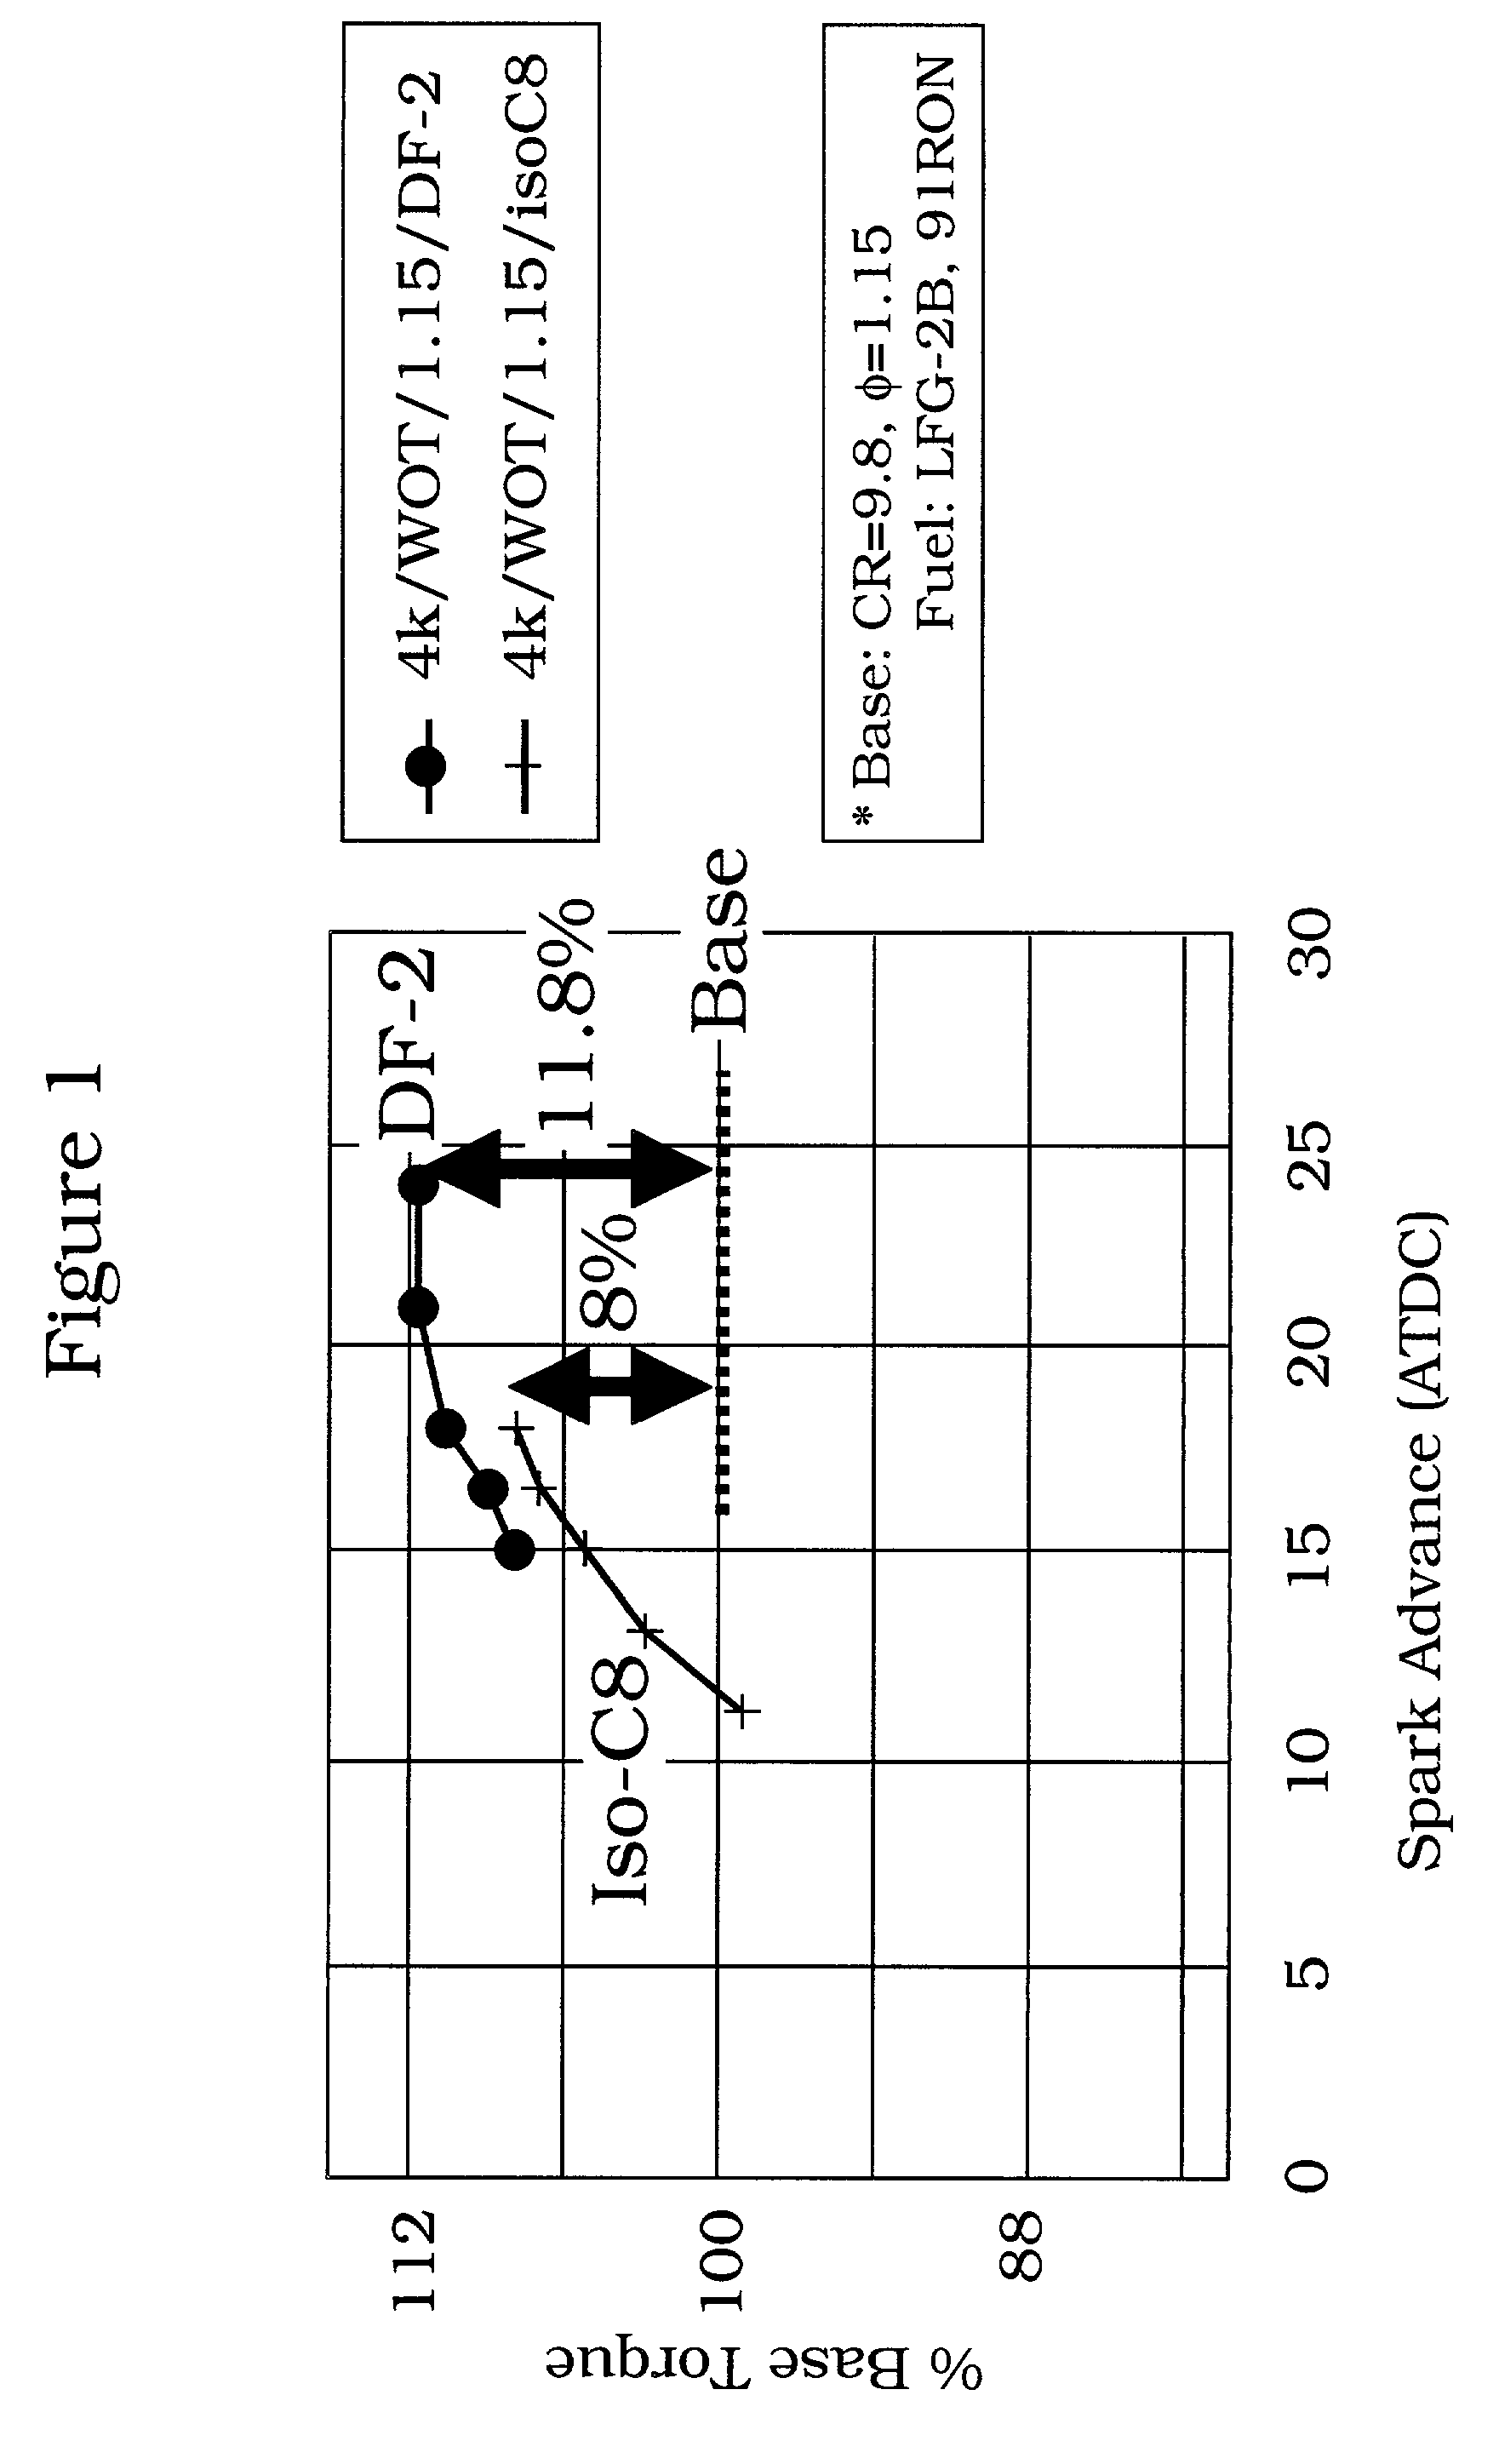 Tuning fuel composition for driving cycle conditions in spark ignition engines